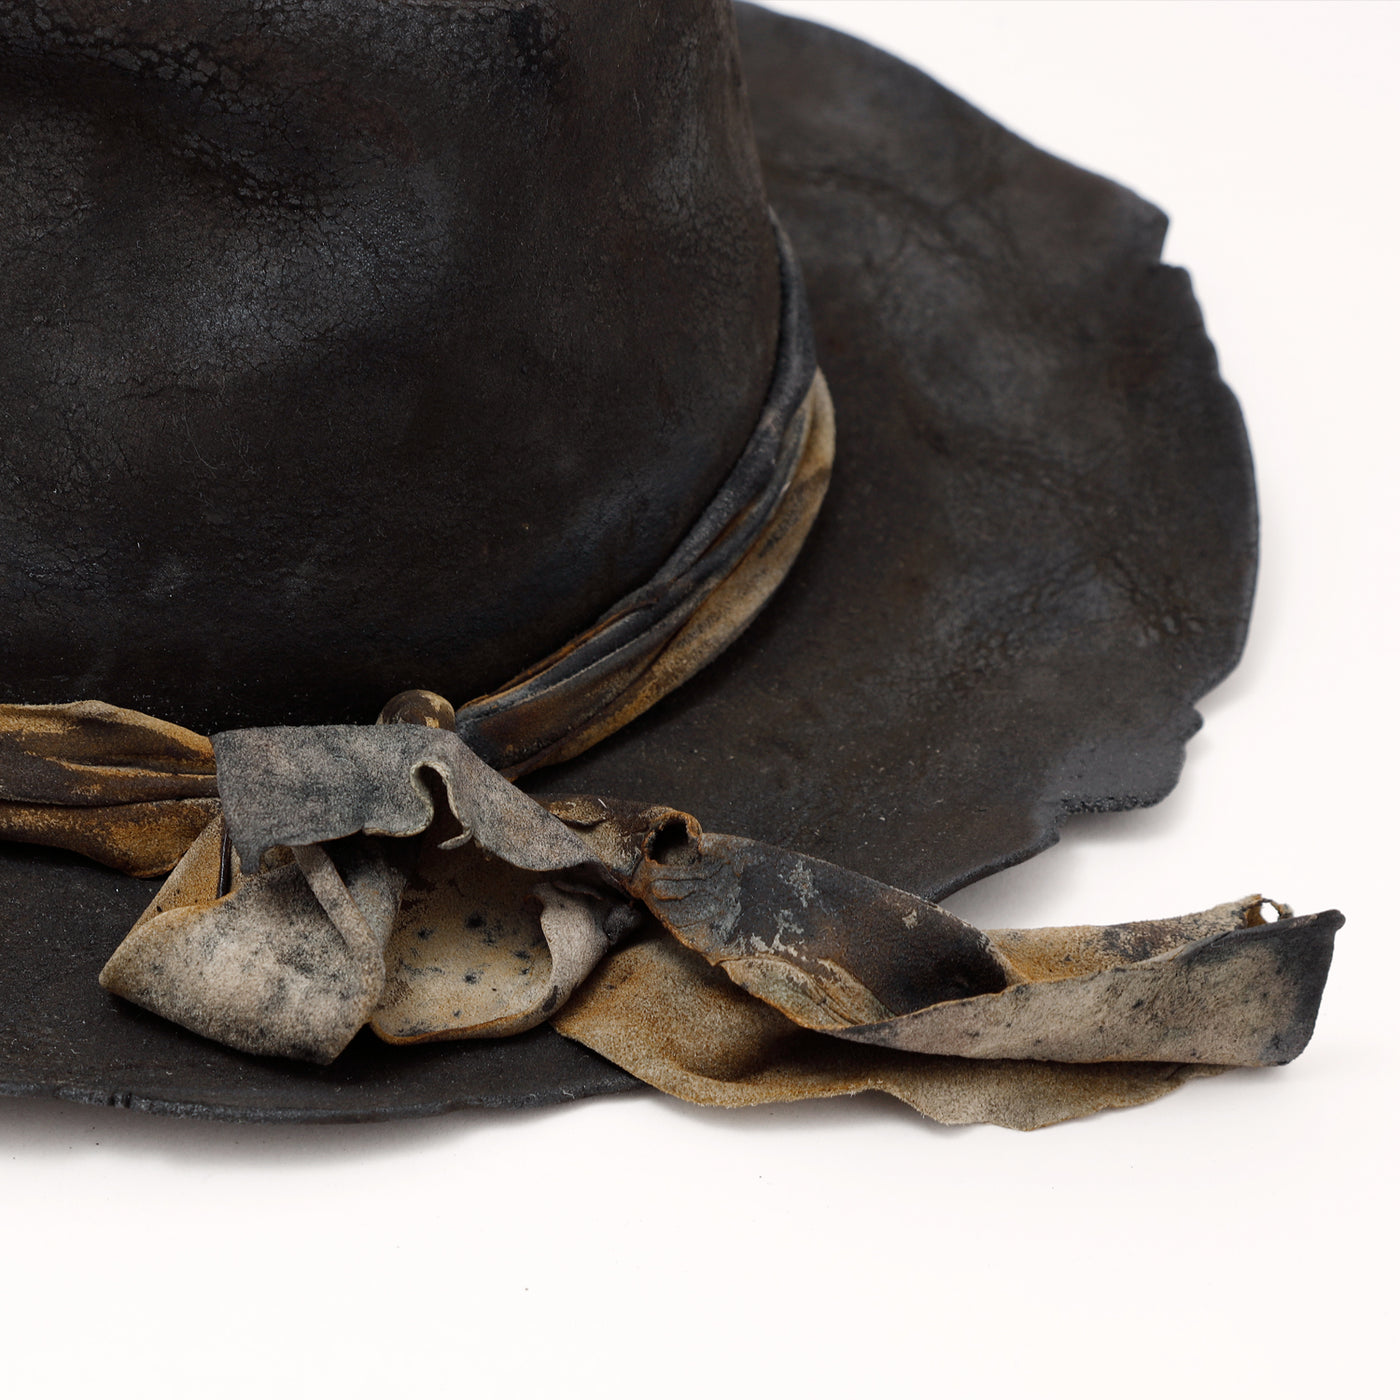 Dyed Leather Rabbit Charcoal Burned Hat / charcoal